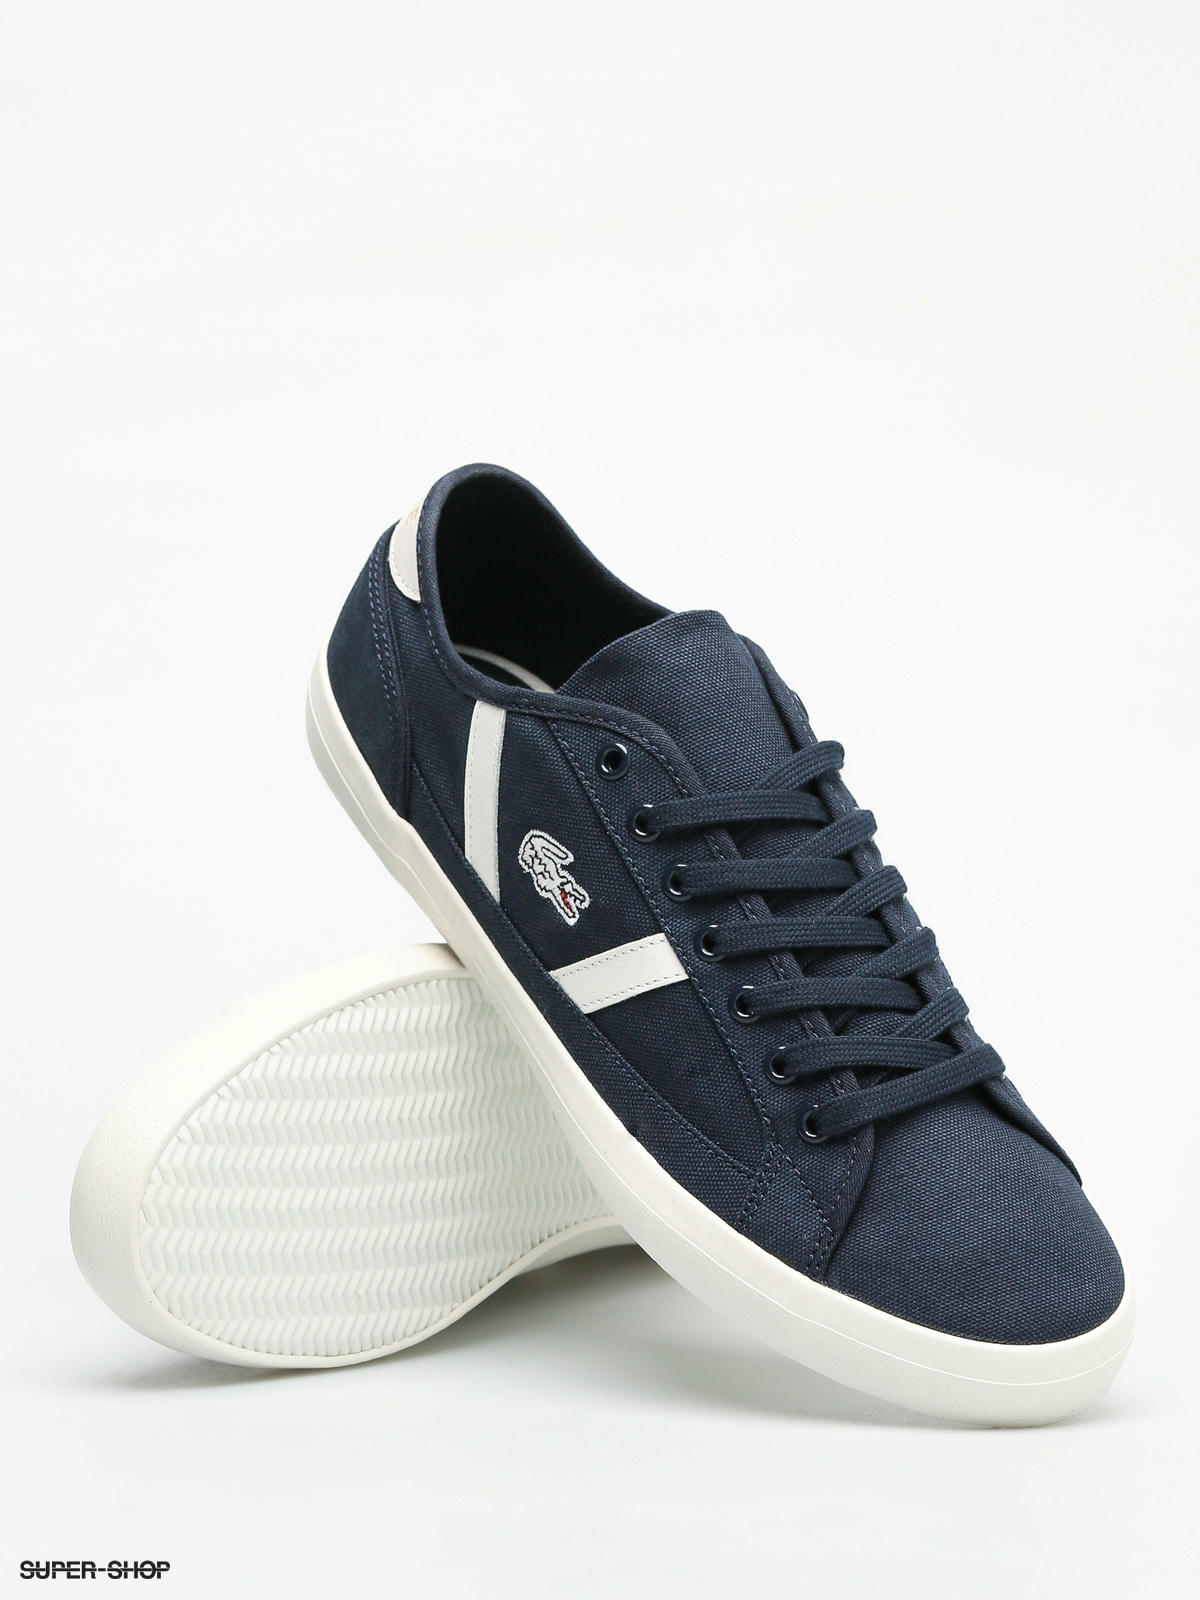 Lacoste Sideline 119 1 Shoes (navy/off 